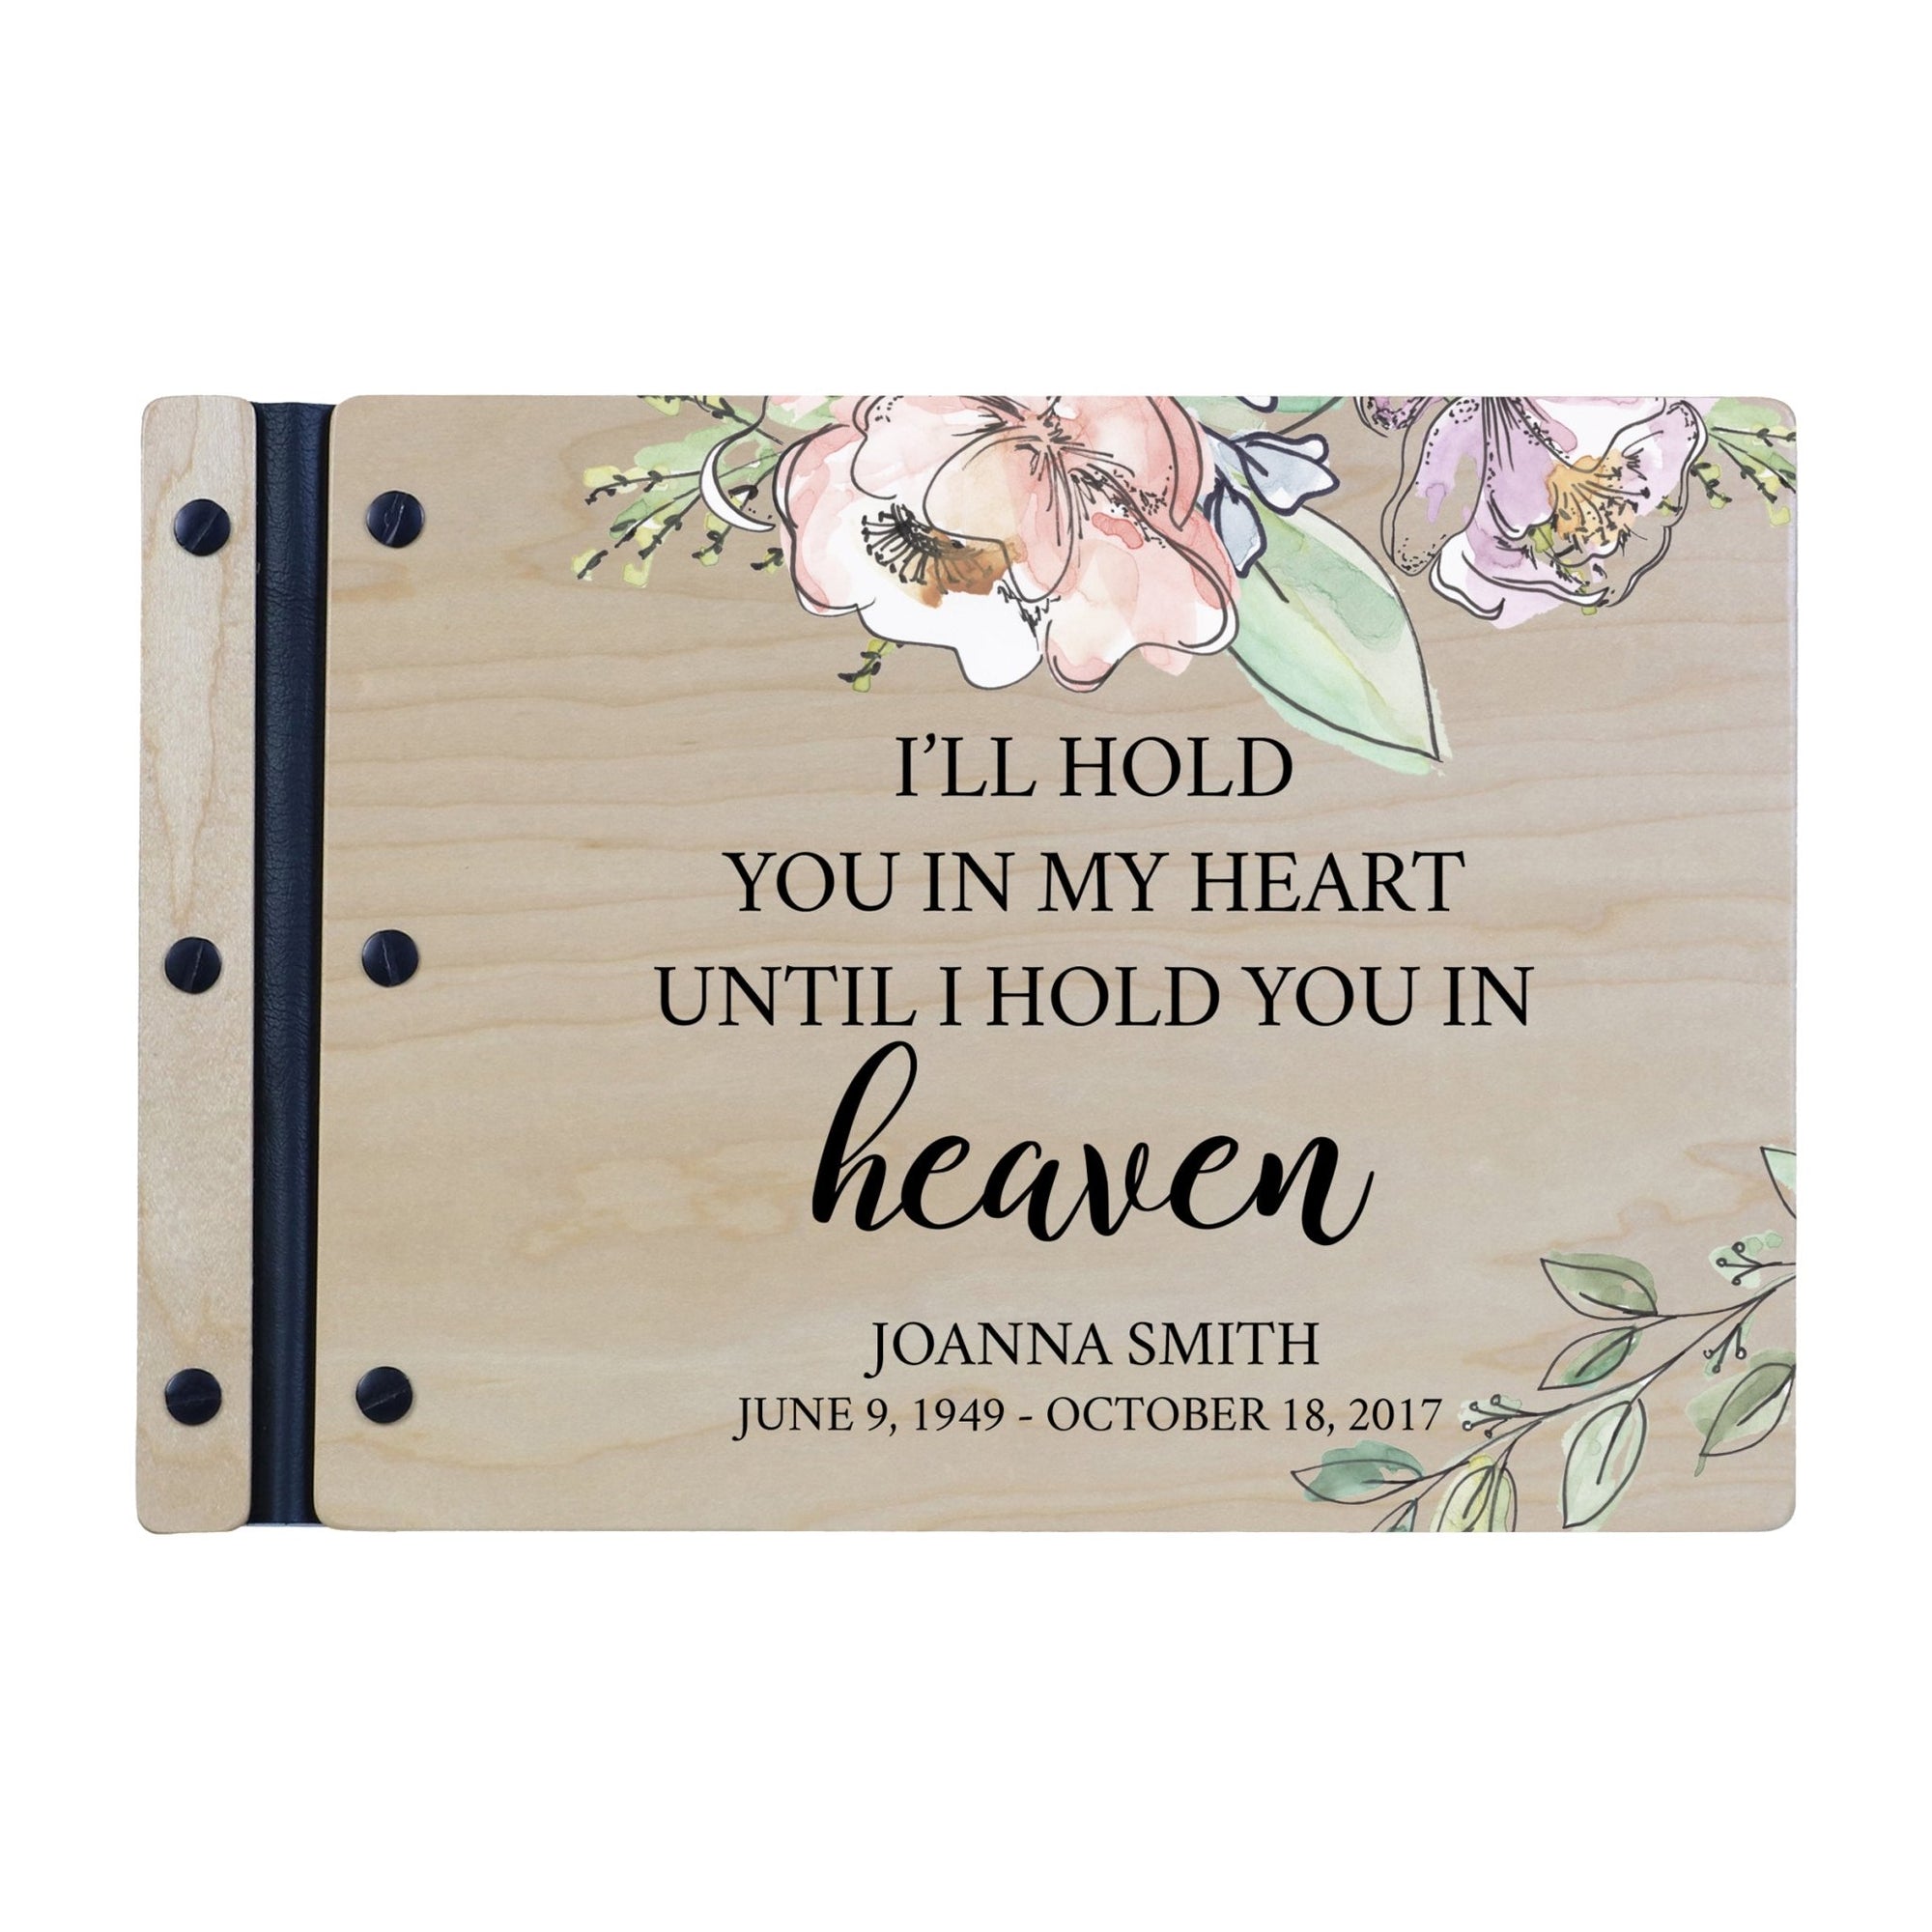 Personalized Medium Wooden Memorial Guestbook 12.375x8.5 - I’ll Hold You In My - LifeSong Milestones